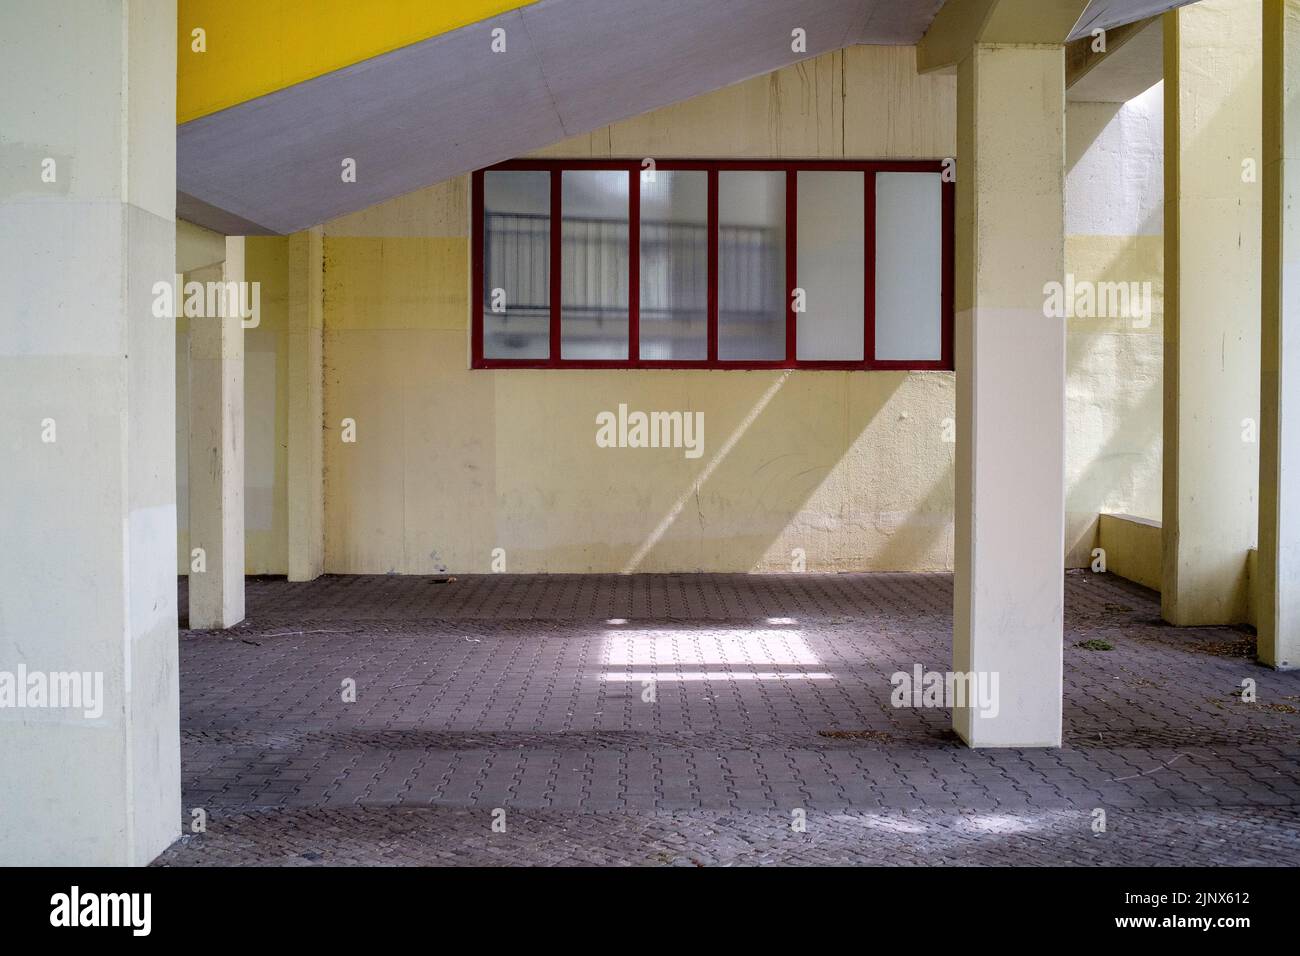 Details of yellow painted concrete architecture at a residential complex in Berlin, Germany. Stock Photo